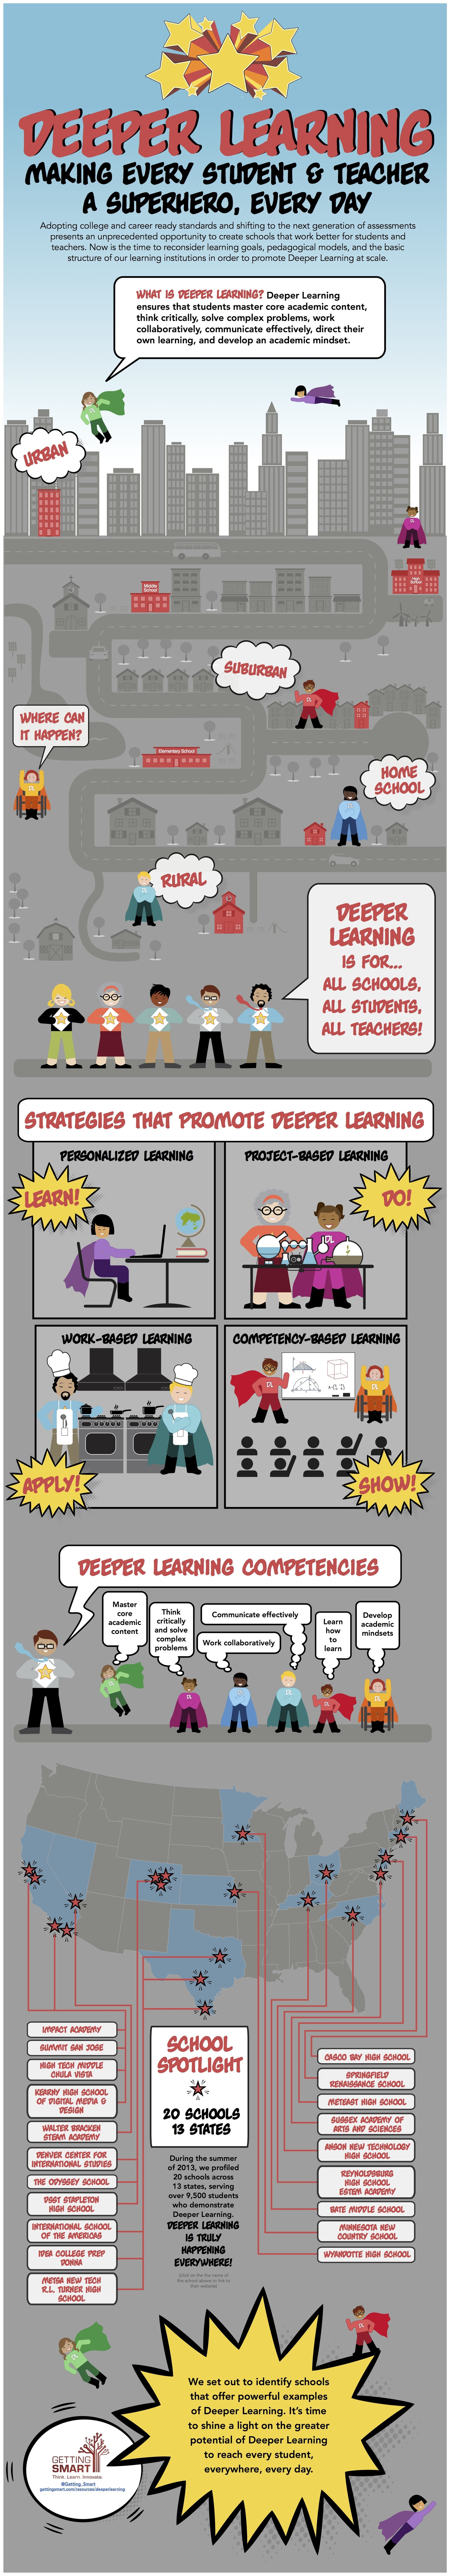 Deeper-Learning-Infographic